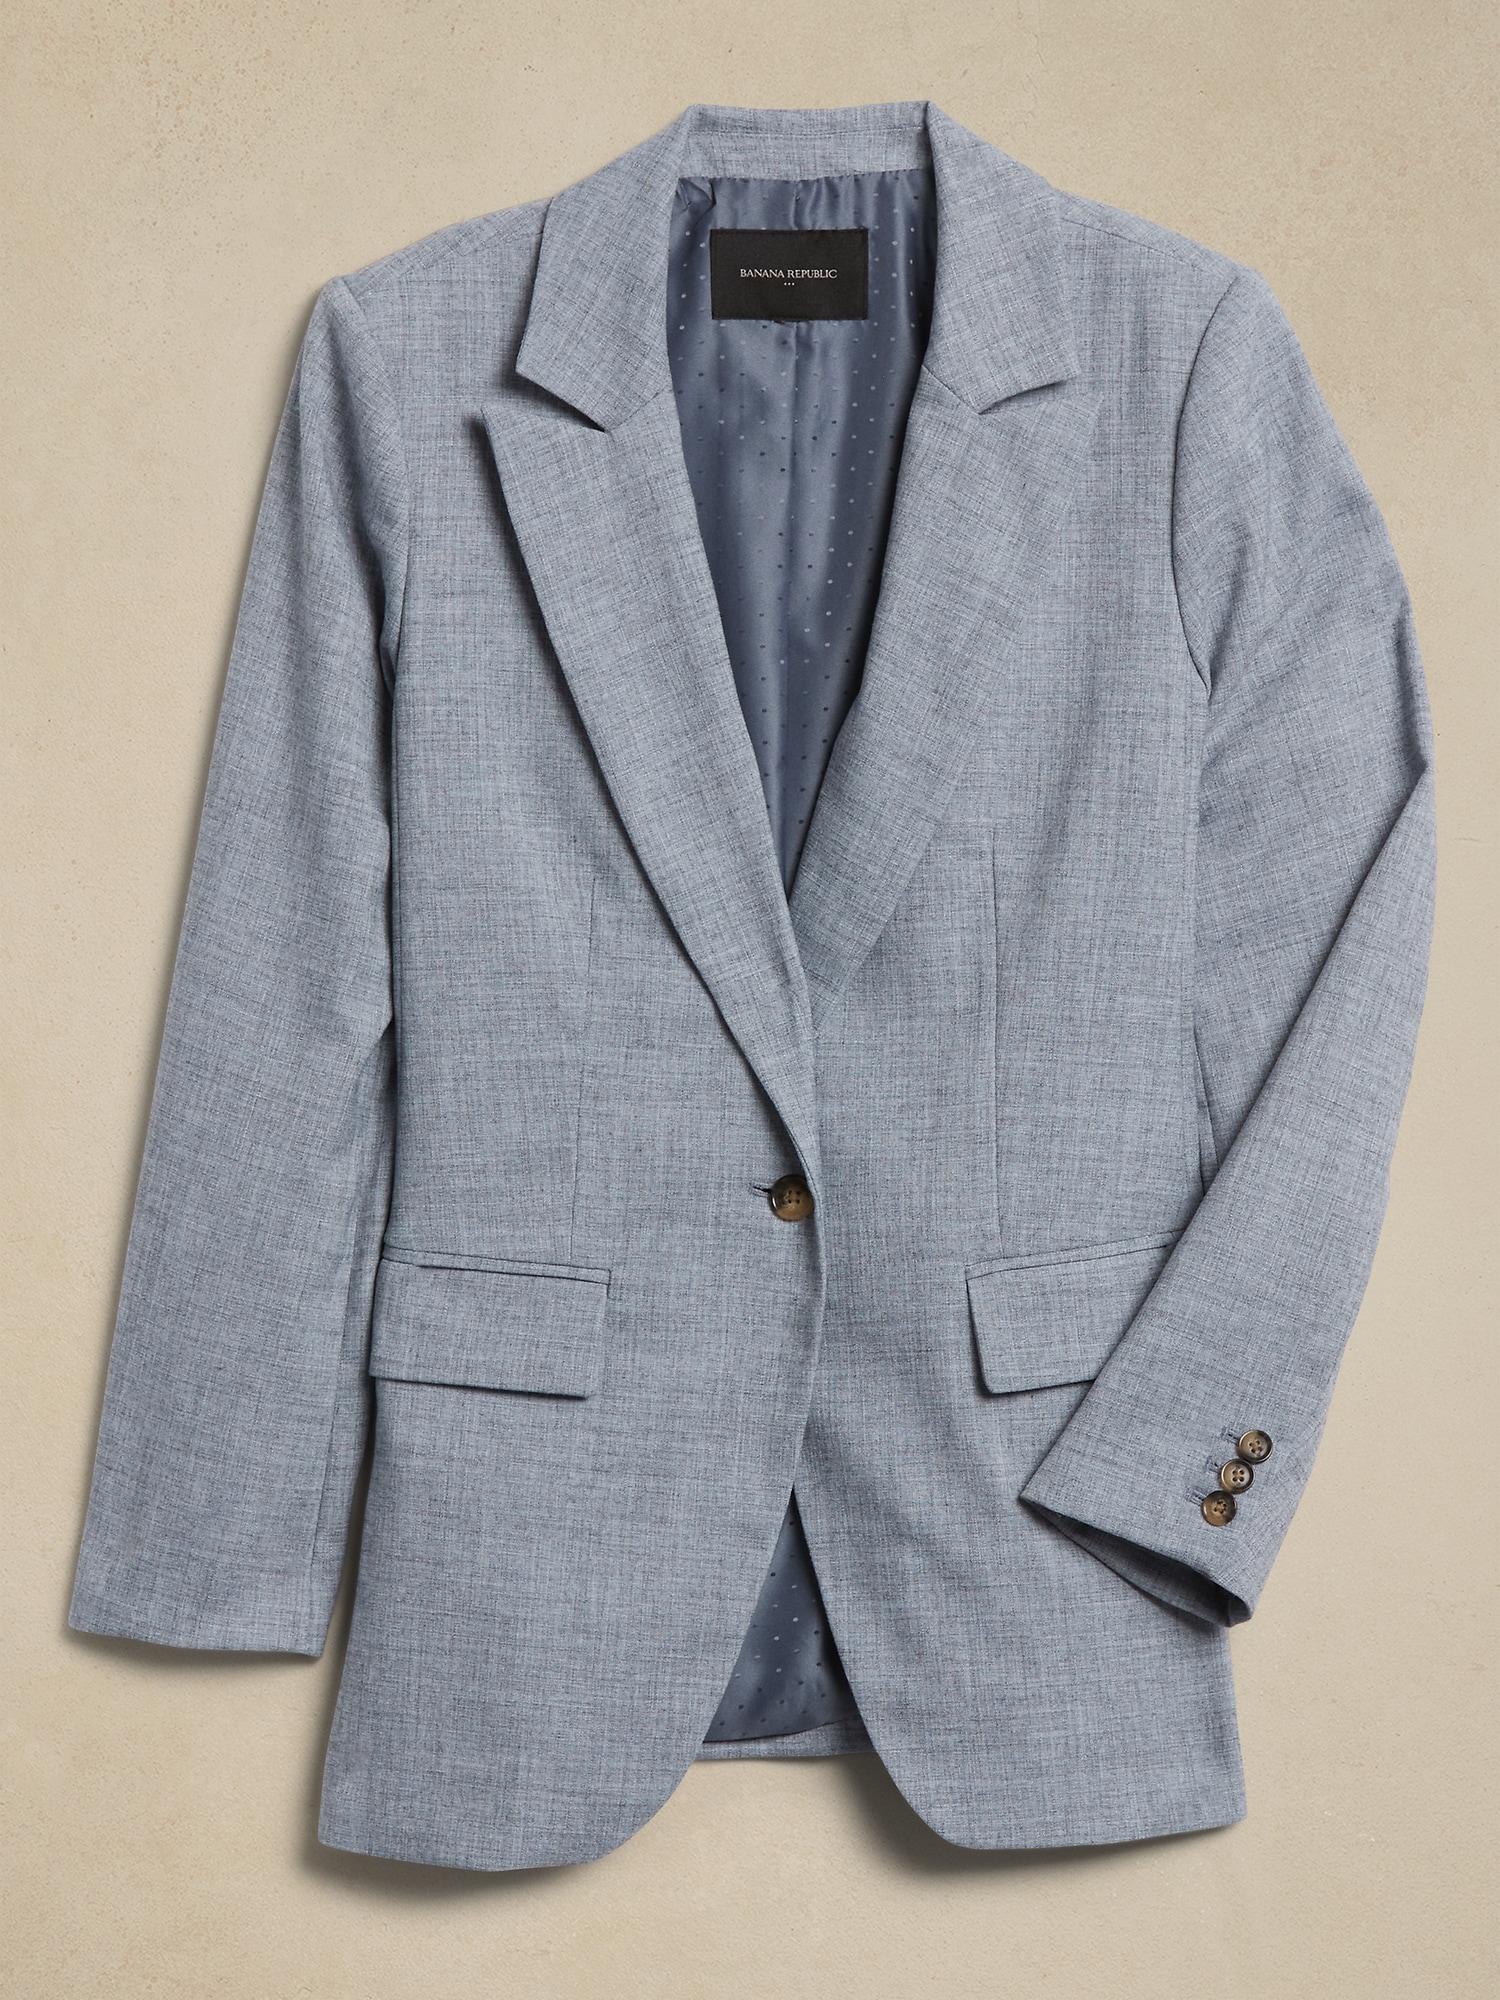 Long and Lean Chambray Suit Blazer